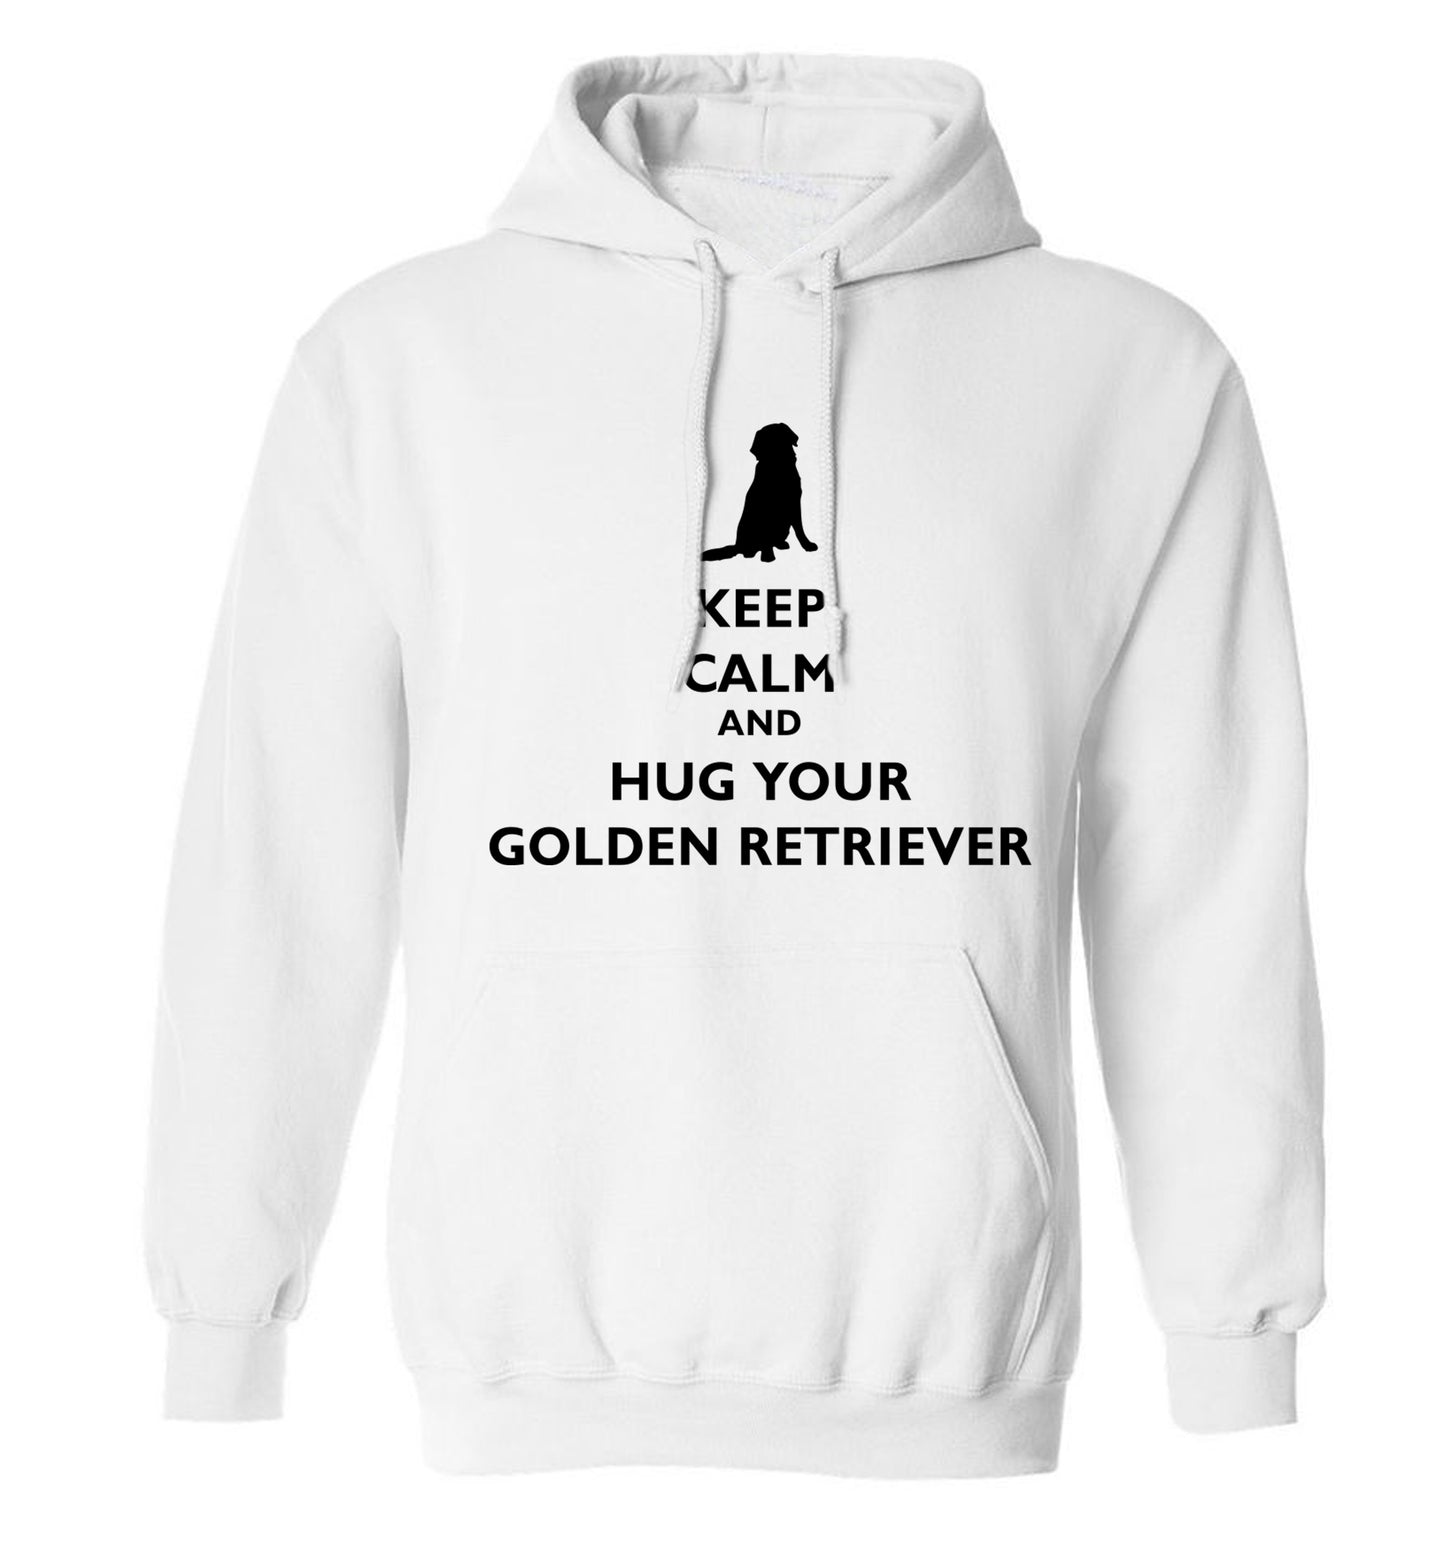 Keep calm and hug your golden retriever adults unisex white hoodie 2XL